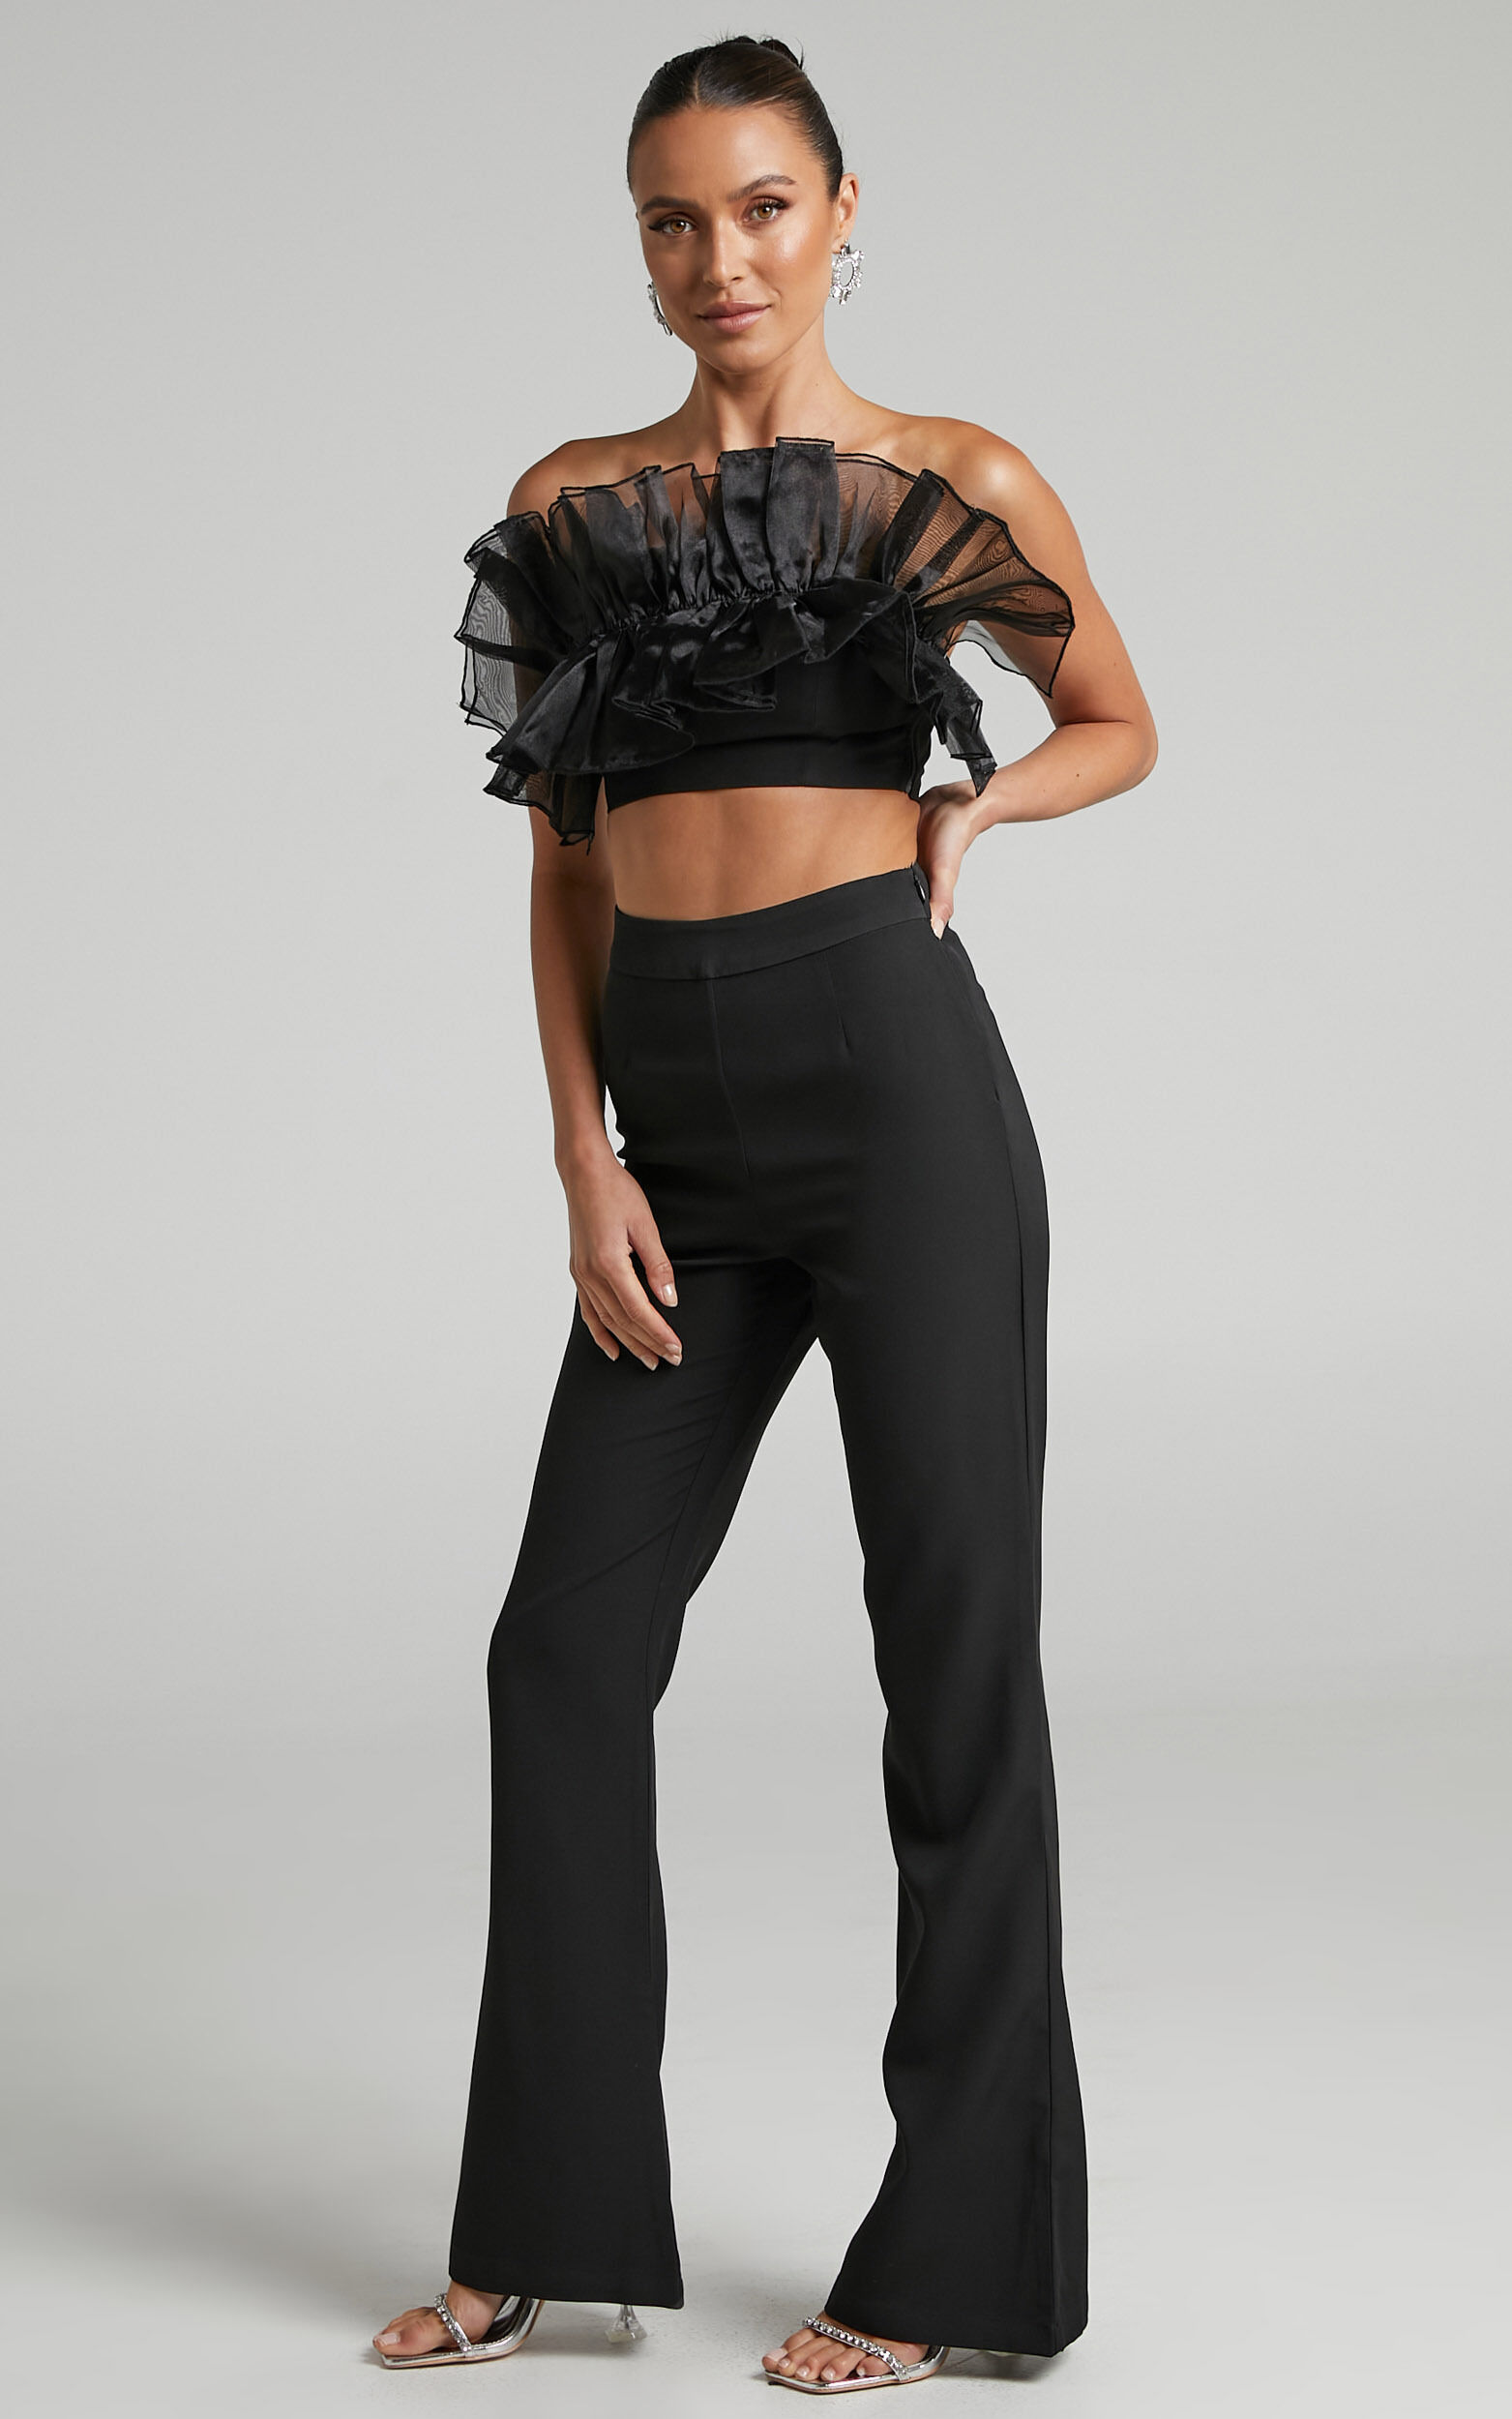 Hermina Pants - High Waisted Ponte Flare Pants in Black